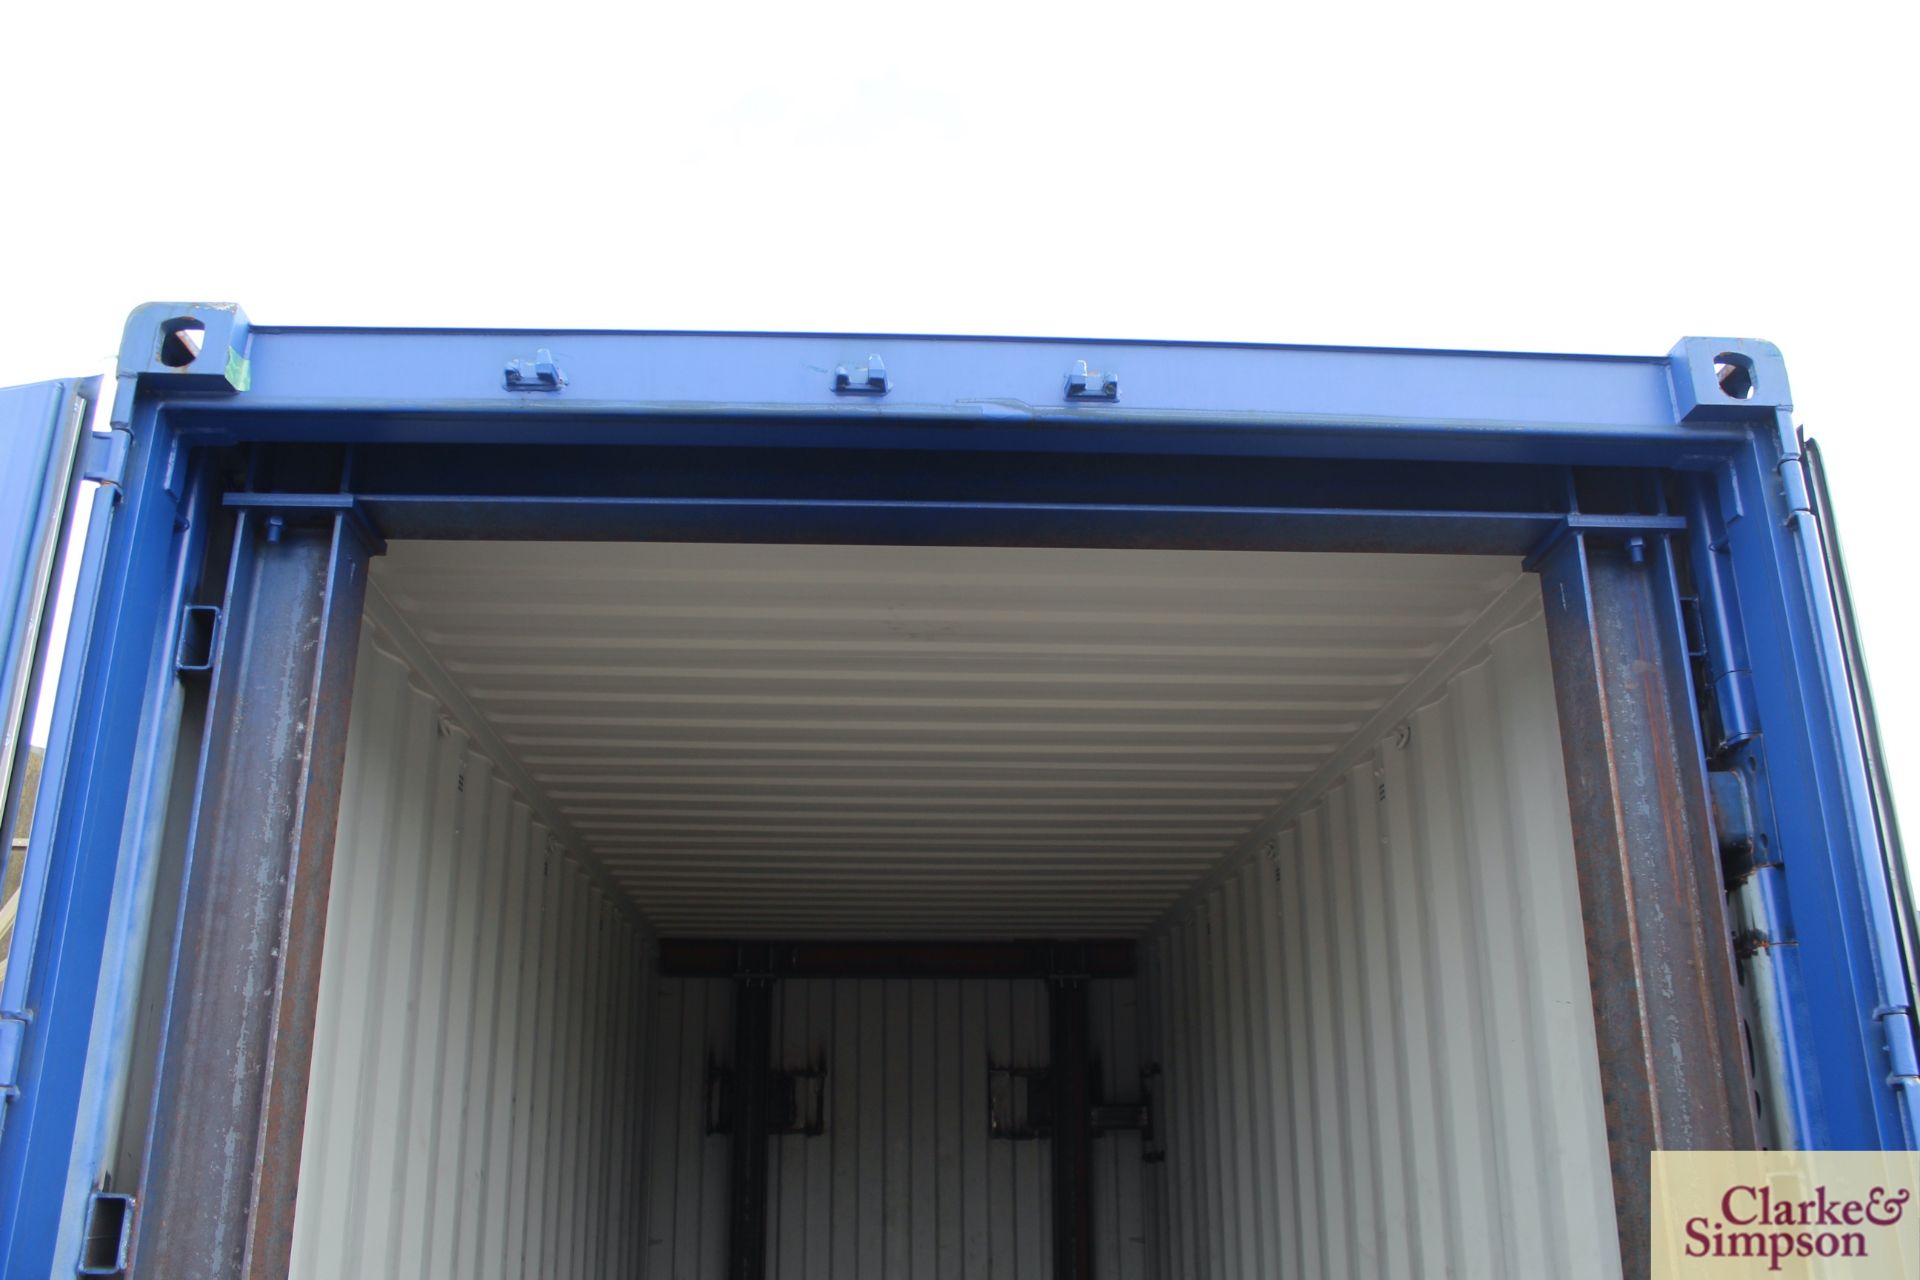 20ft x 9ft6in high shipping container. 2019. Partially reinforced to interior to include plates - Image 11 of 19